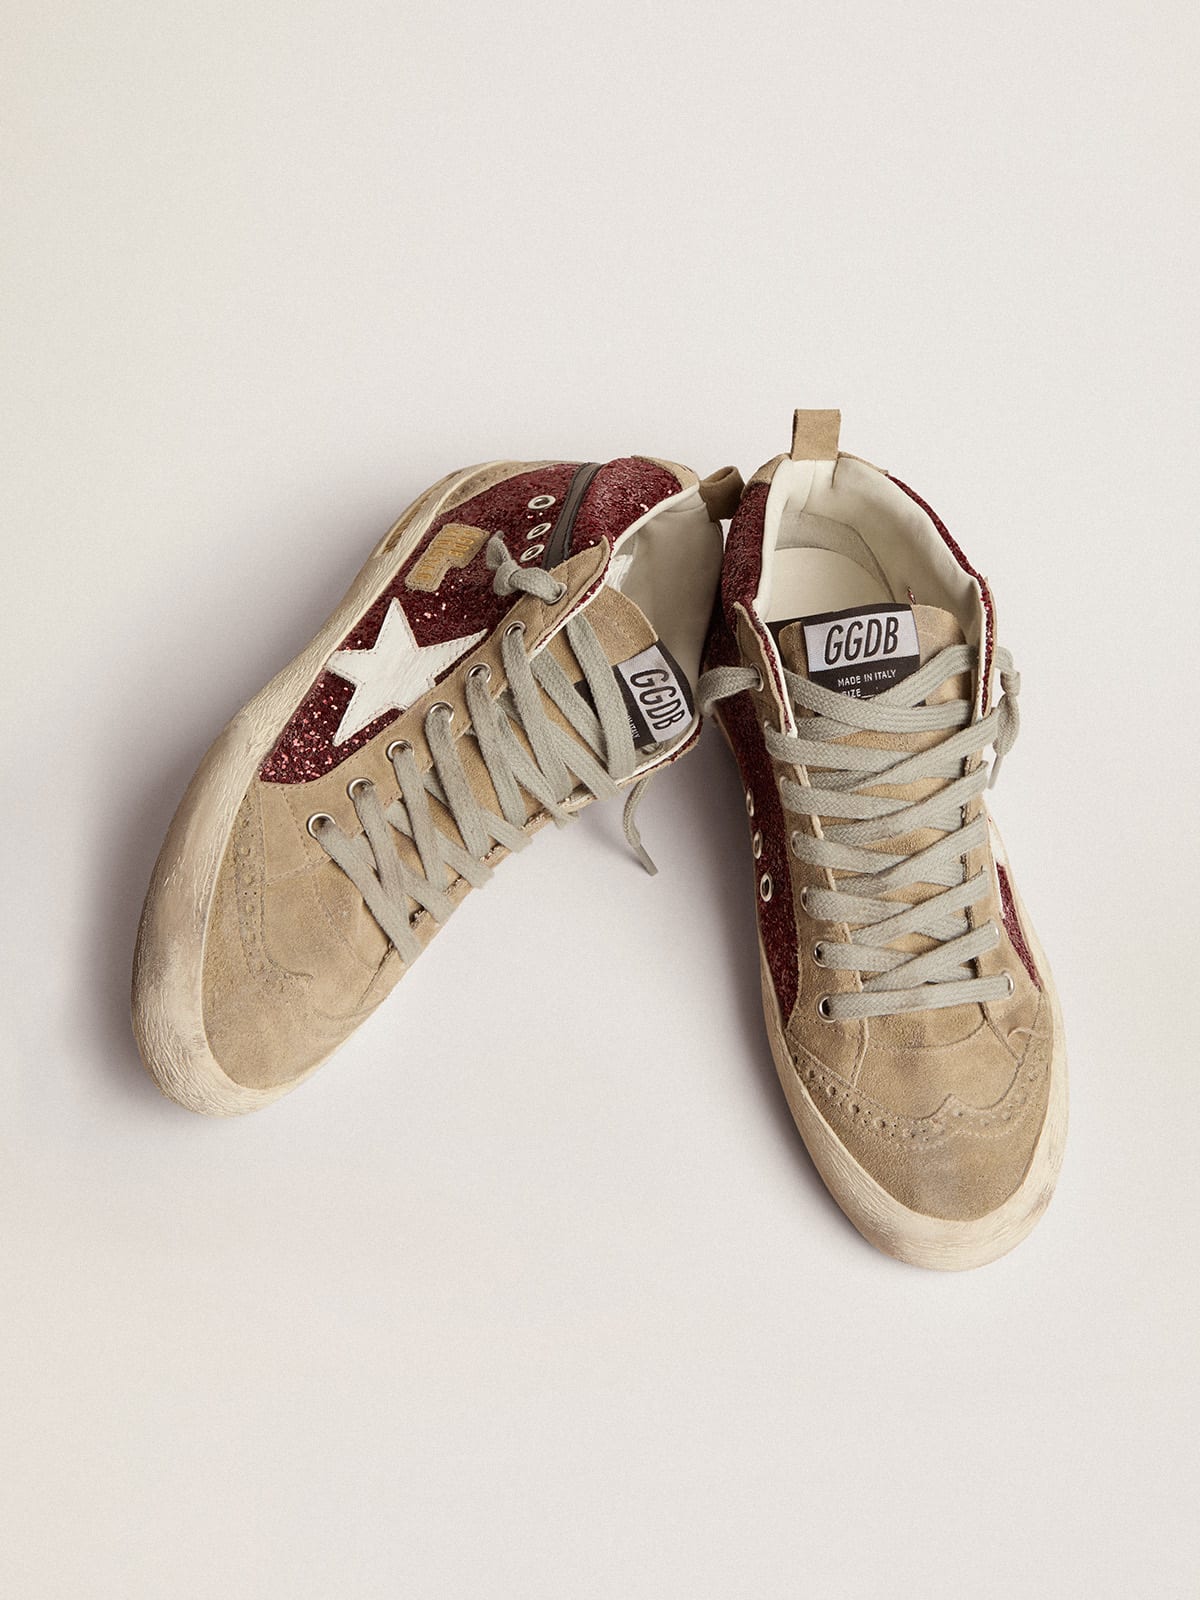 Golden Goose - Women's Mid Star in burgundy glitter with gray inserts and white star in 